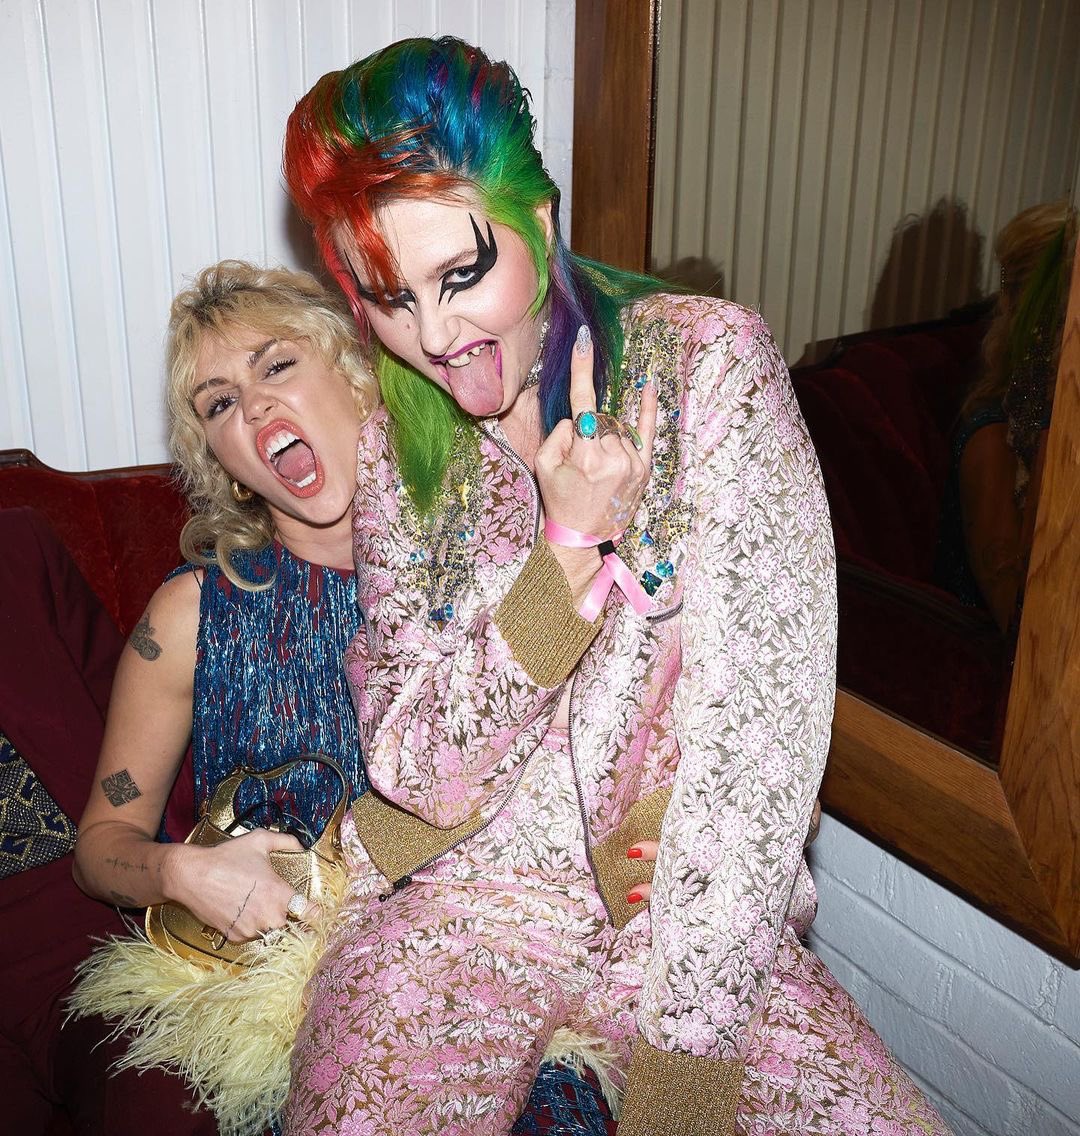 New pic of Miley with Dani Miller at the #GucciLoveParade